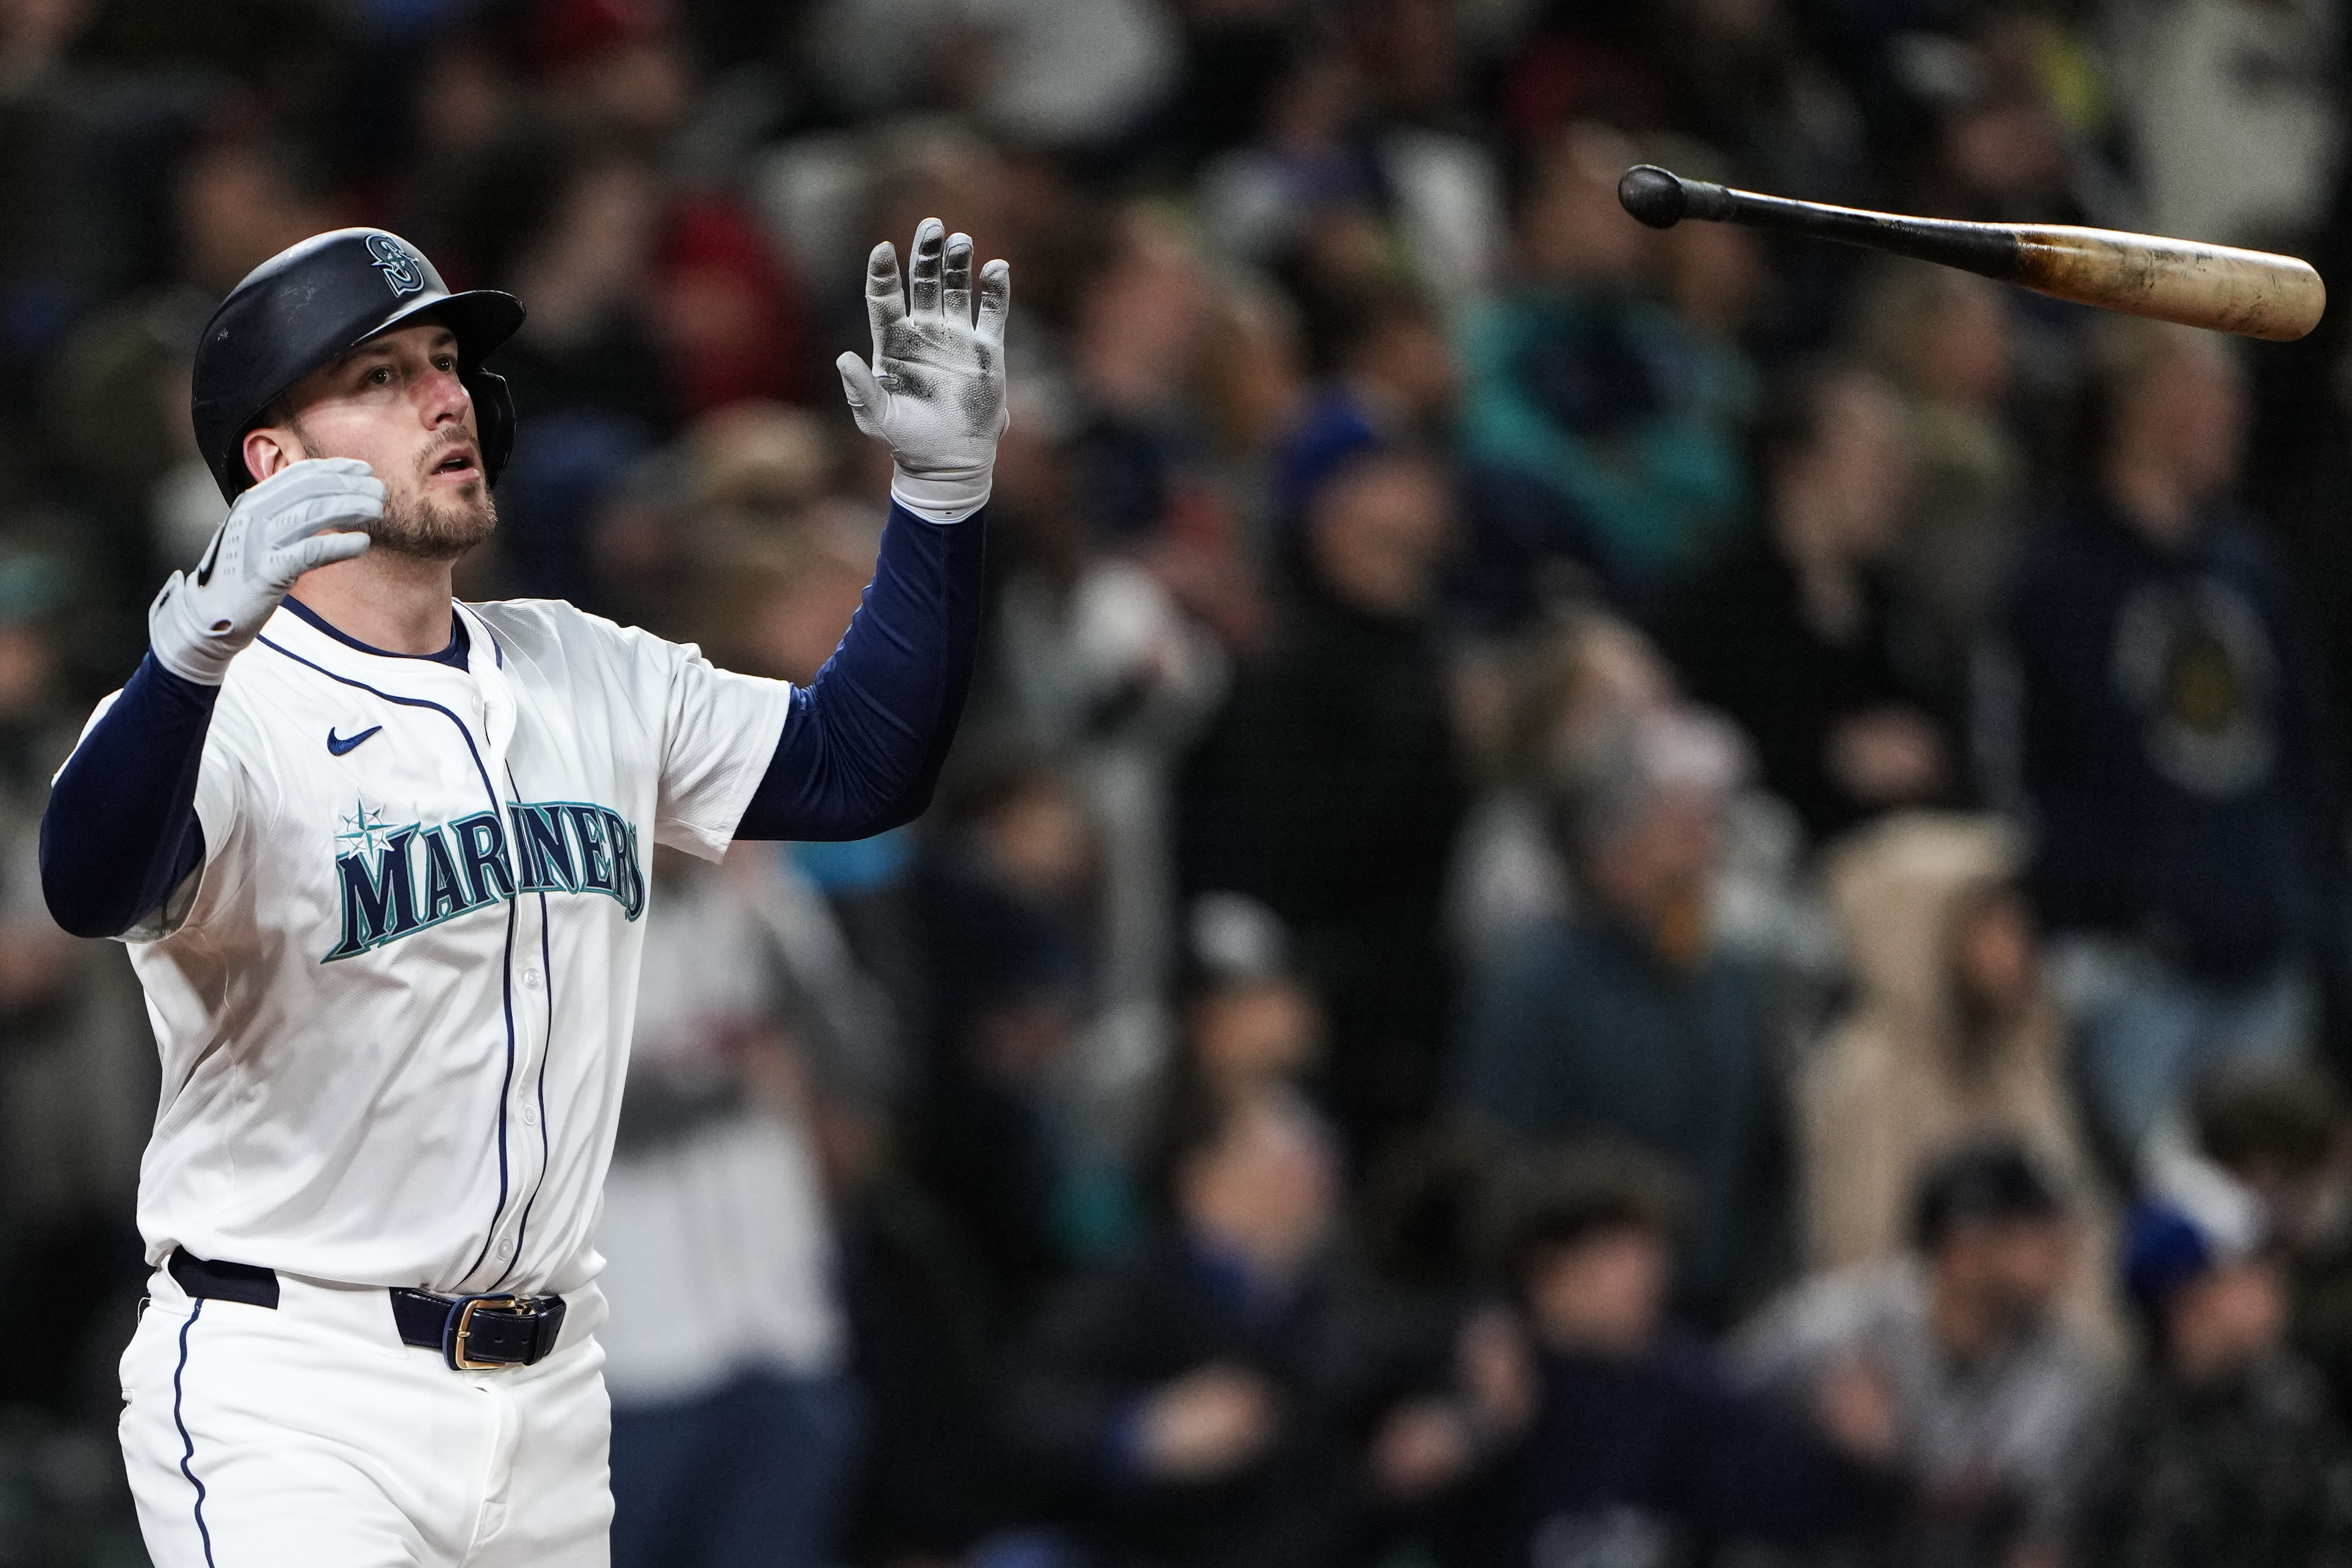 Mitch Garver's home run in the 9th inning gives Mariners a 2-1 win over Braves